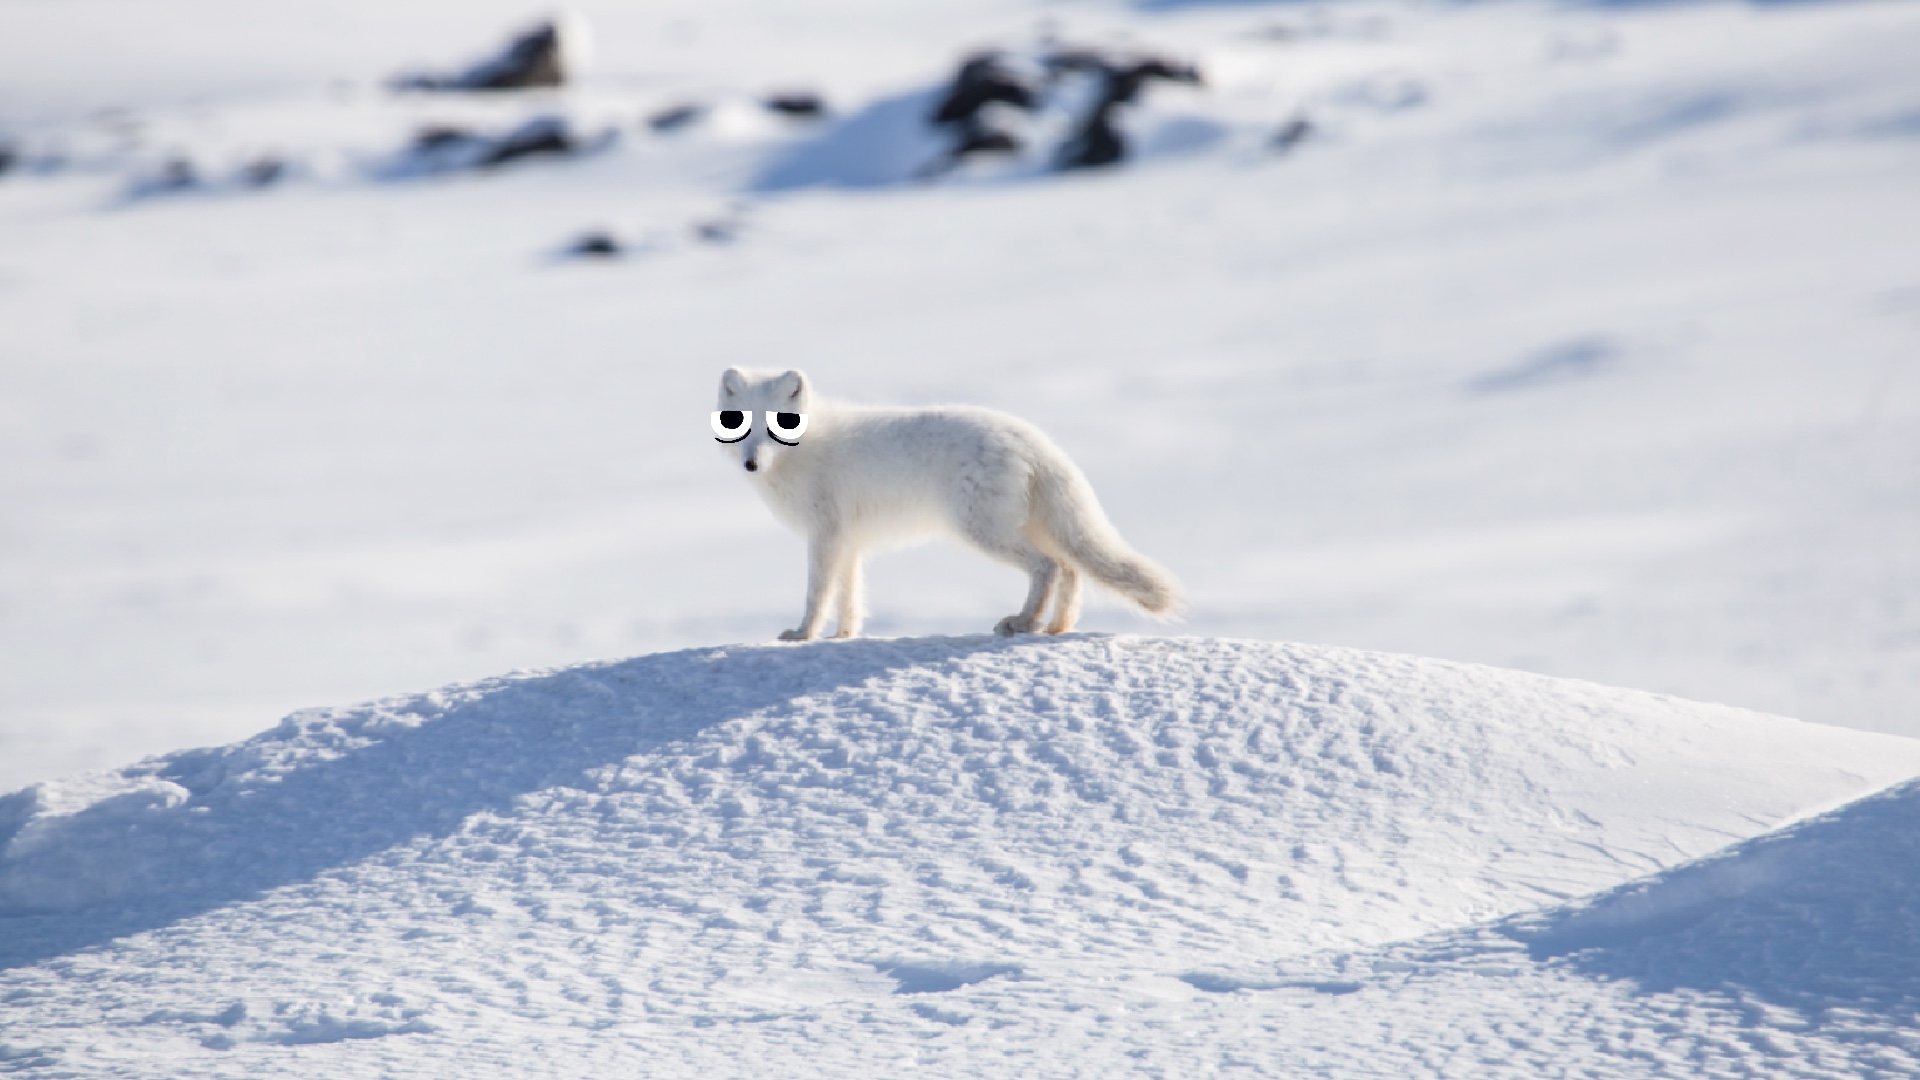 Top 10 facts about Arctic foxes